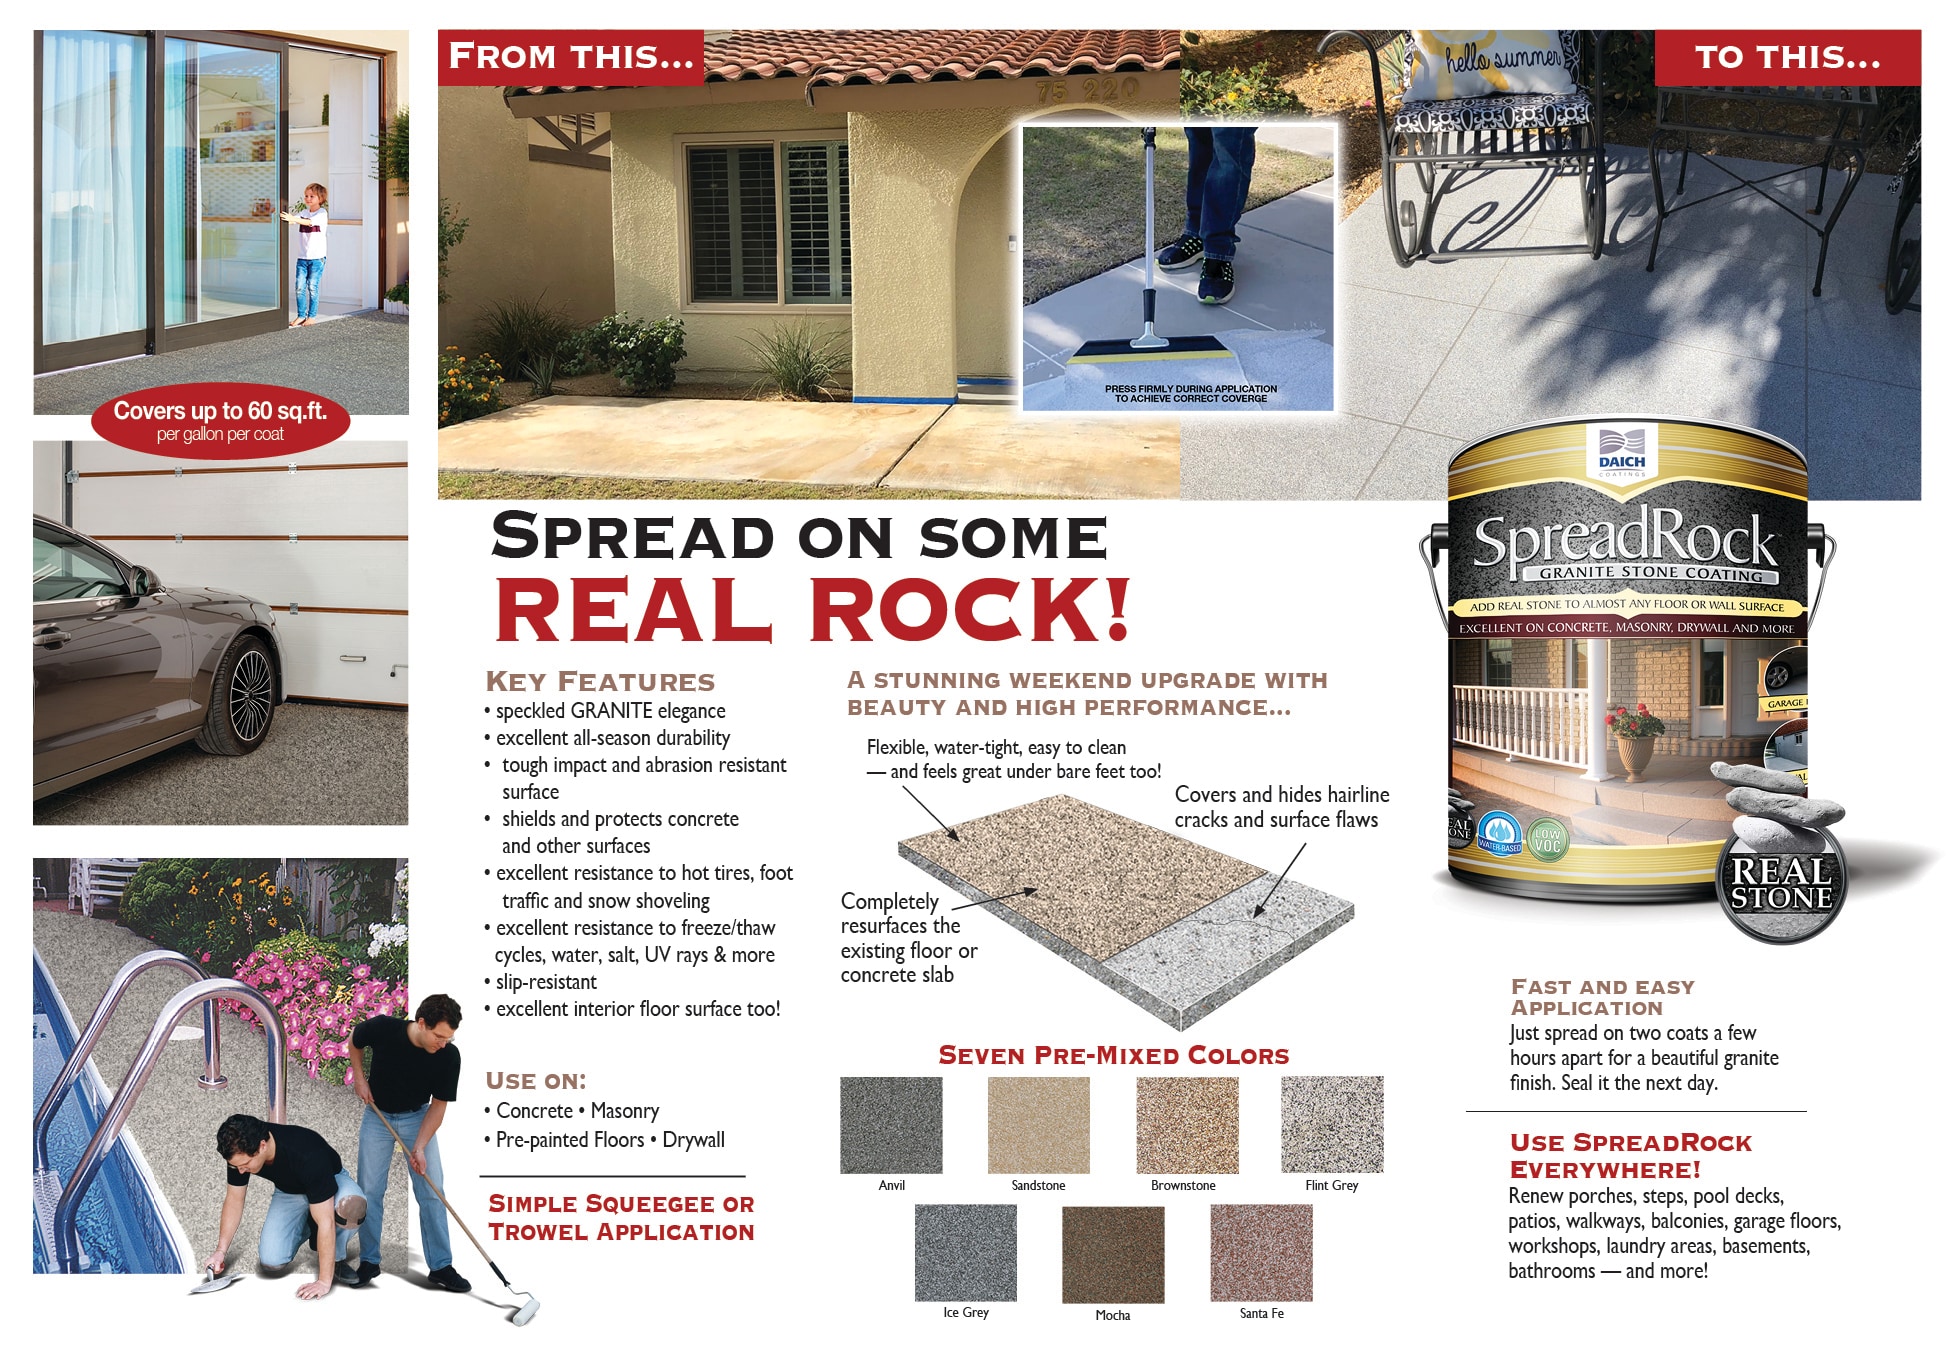 Daich SpreadRock Flint Gray/Satin Interior/Exterior Anti-skid Porch and  Floor Paint (3-Gallon) in the Porch & Floor Paint department at